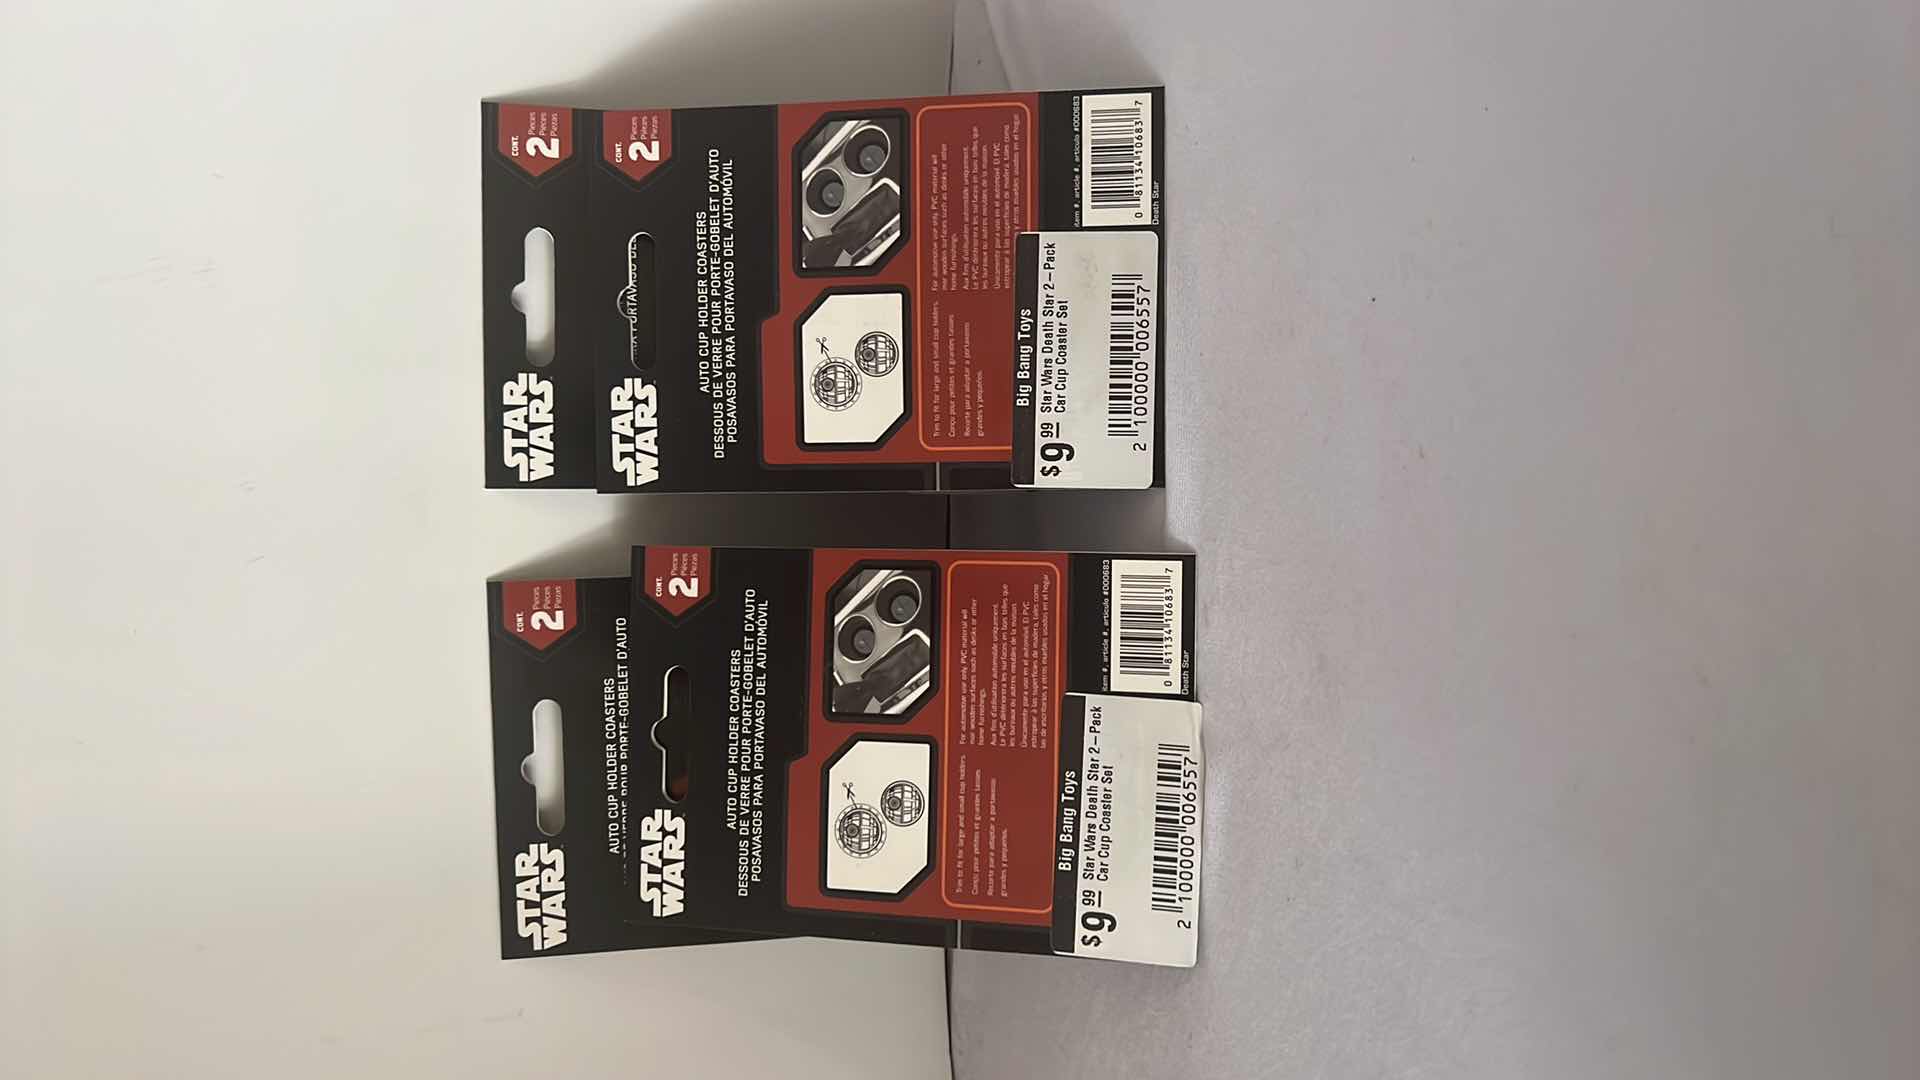 Photo 2 of 4-BRAND NEW STAR WARS DEATH STAR 2-PACK CAR CUP COASTER SETS $40 (8 TOTAL CAR COASTERS)